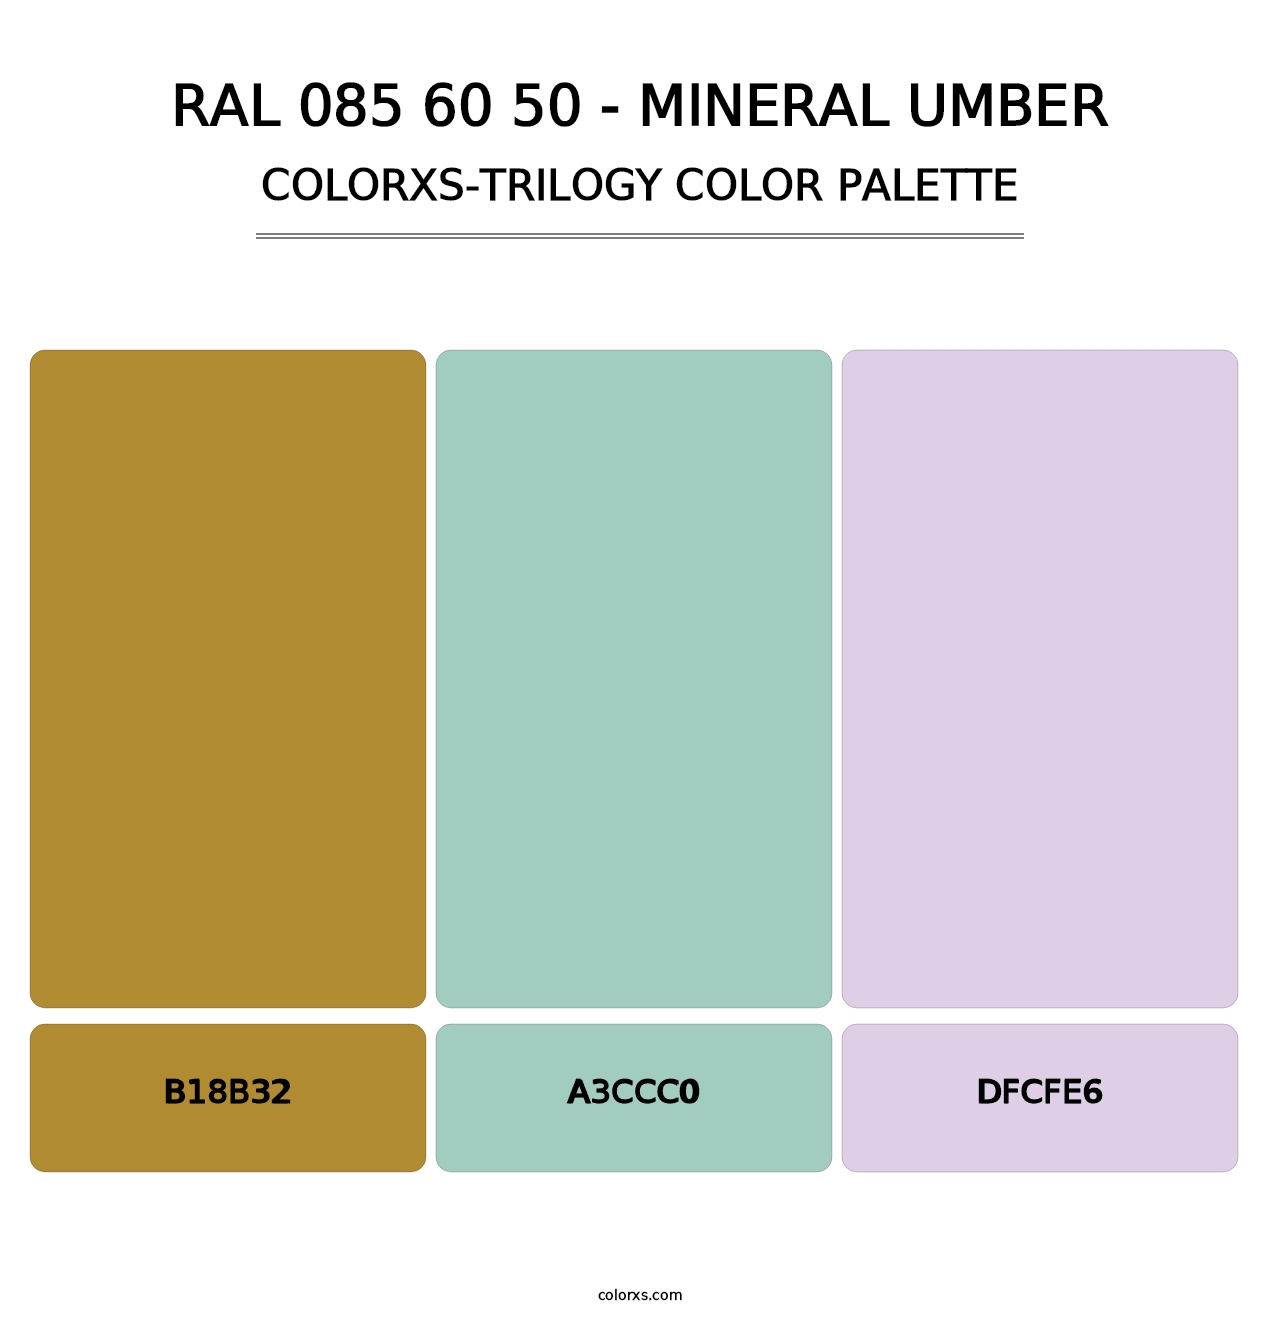 RAL 085 60 50 - Mineral Umber - Colorxs Trilogy Palette